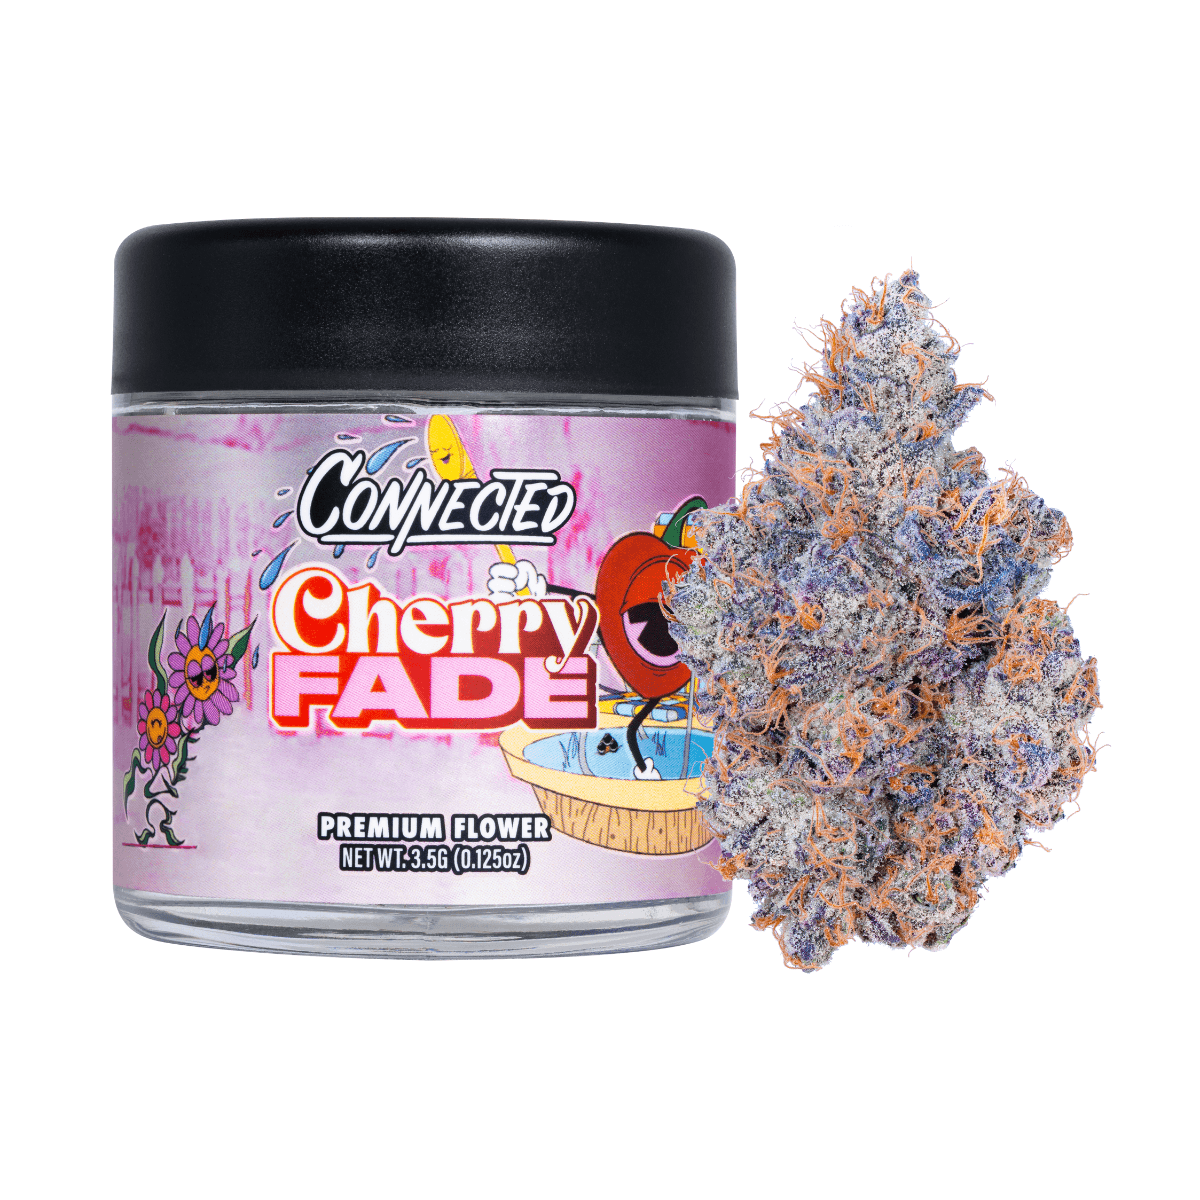 Cherry Fade - Connected Cannabis Co